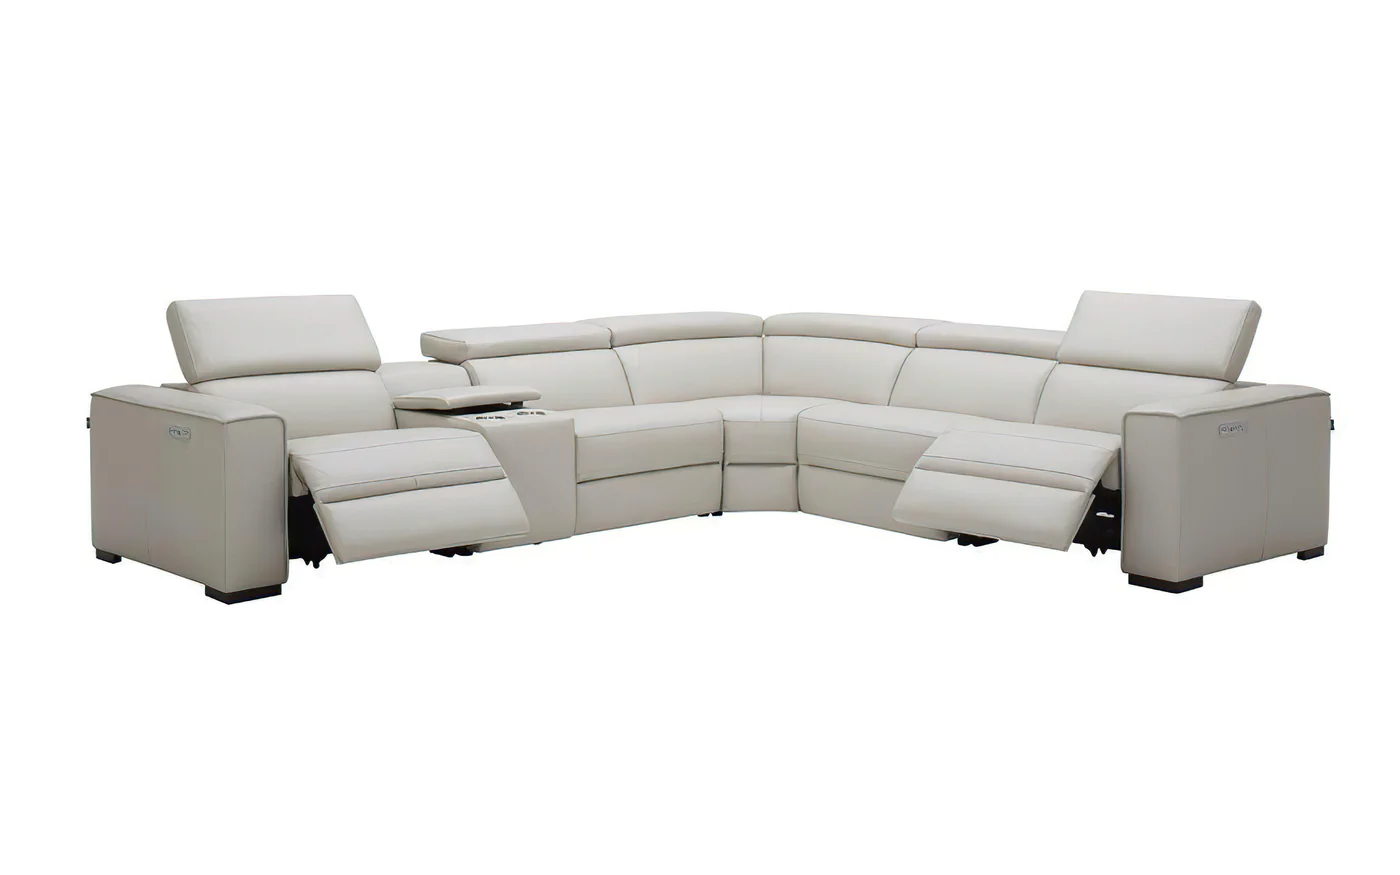 Discovering the Best Las Vegas Sectional
Sofas for Your Home